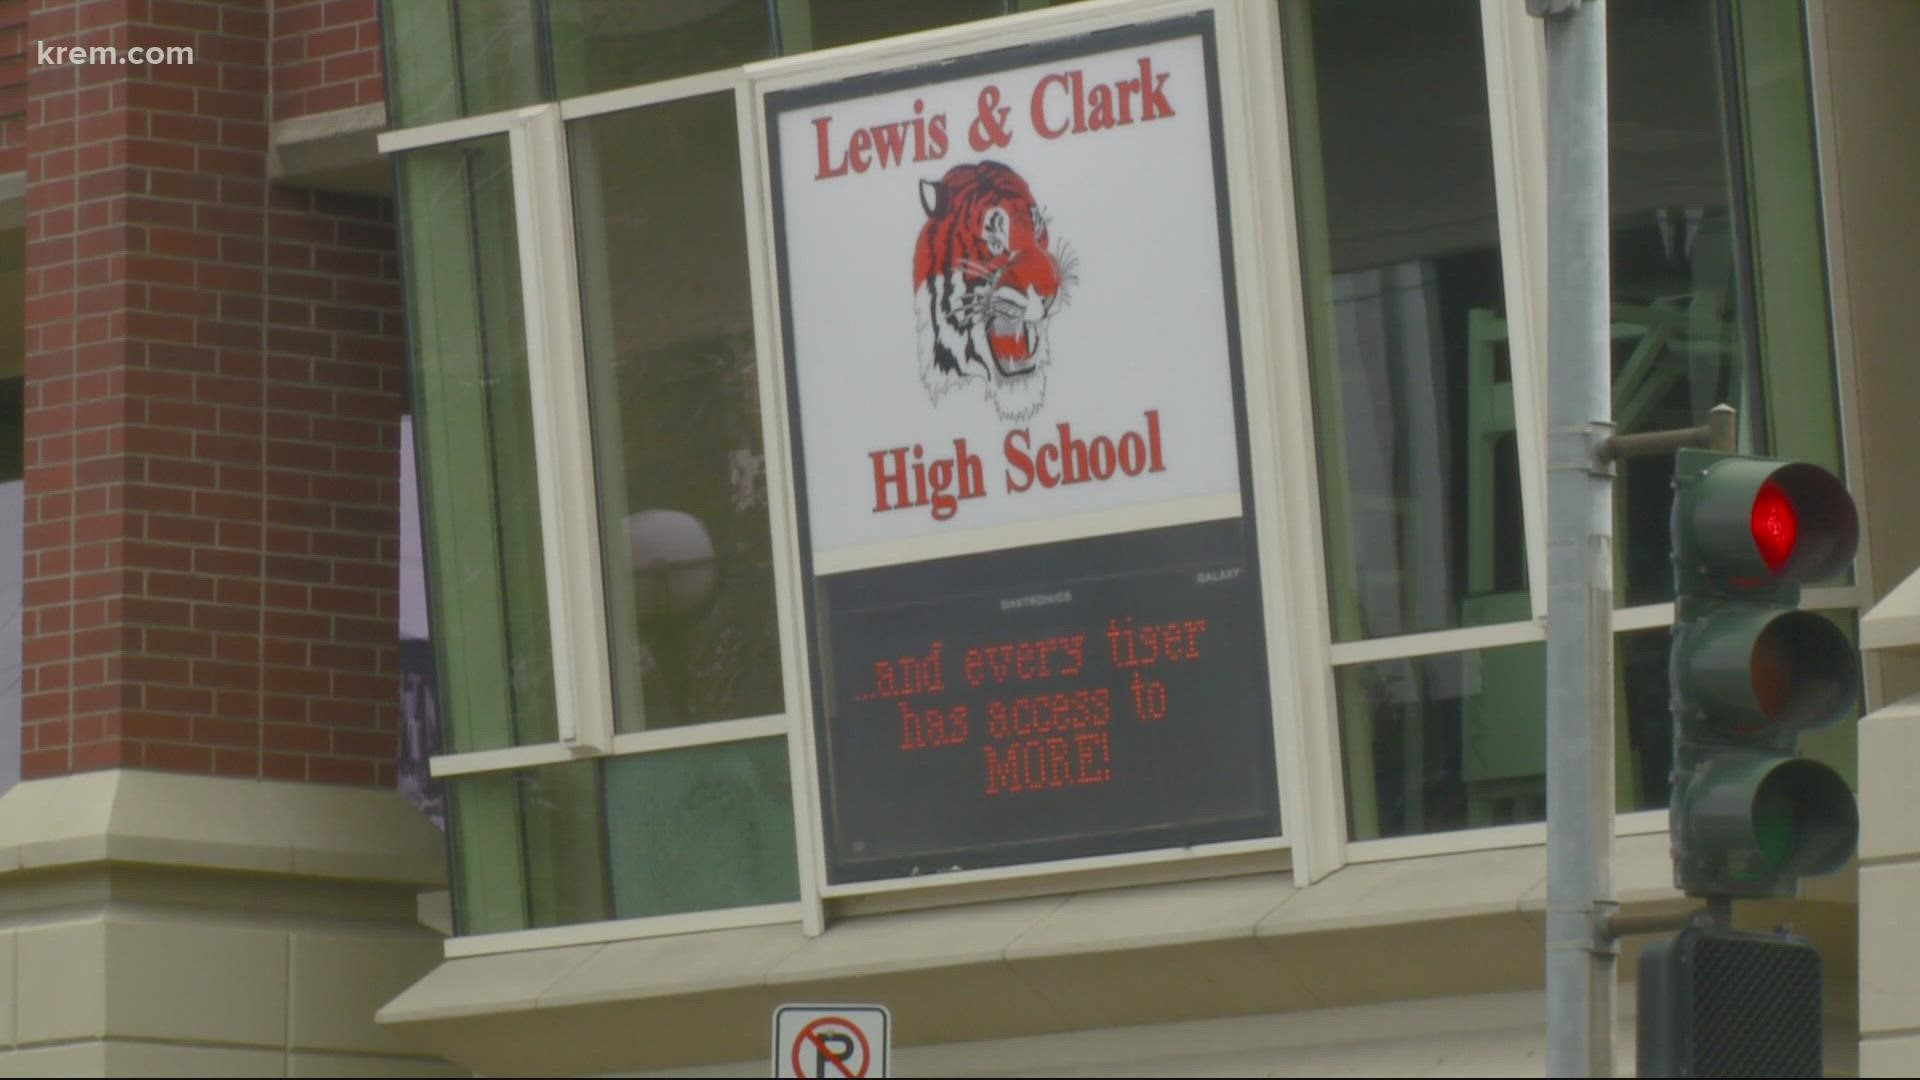 Parents and students share emotions over the hoax phone call that sent local high schools into lockdown